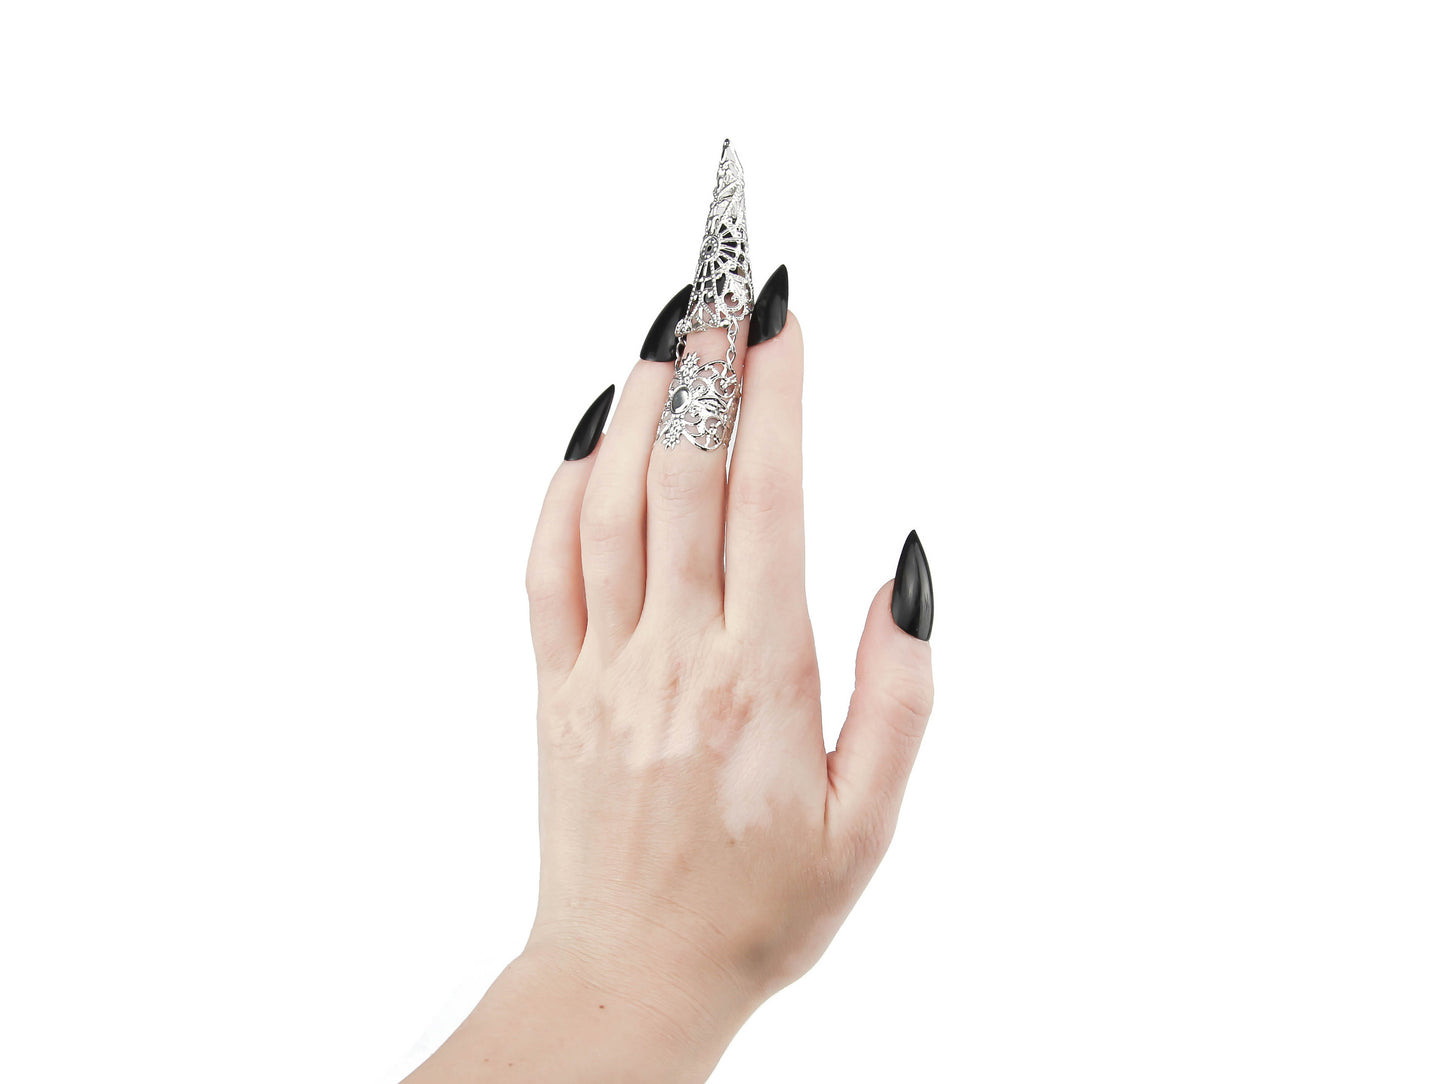 A hand adorned with Myril Jewels' distinctive claw ring captures the essence of neo-gothic allure. This dark-avantgarde accessory, worn on the middle finger, features an elaborate lace-like pattern that extends over the finger to mimic a dramatic claw, perfect for gothic and alternative style aficionados. The ring's bold design makes a statement, ideal for minimal goth daily wear or as an eye-catching piece for Halloween, rave parties, and festival jewels